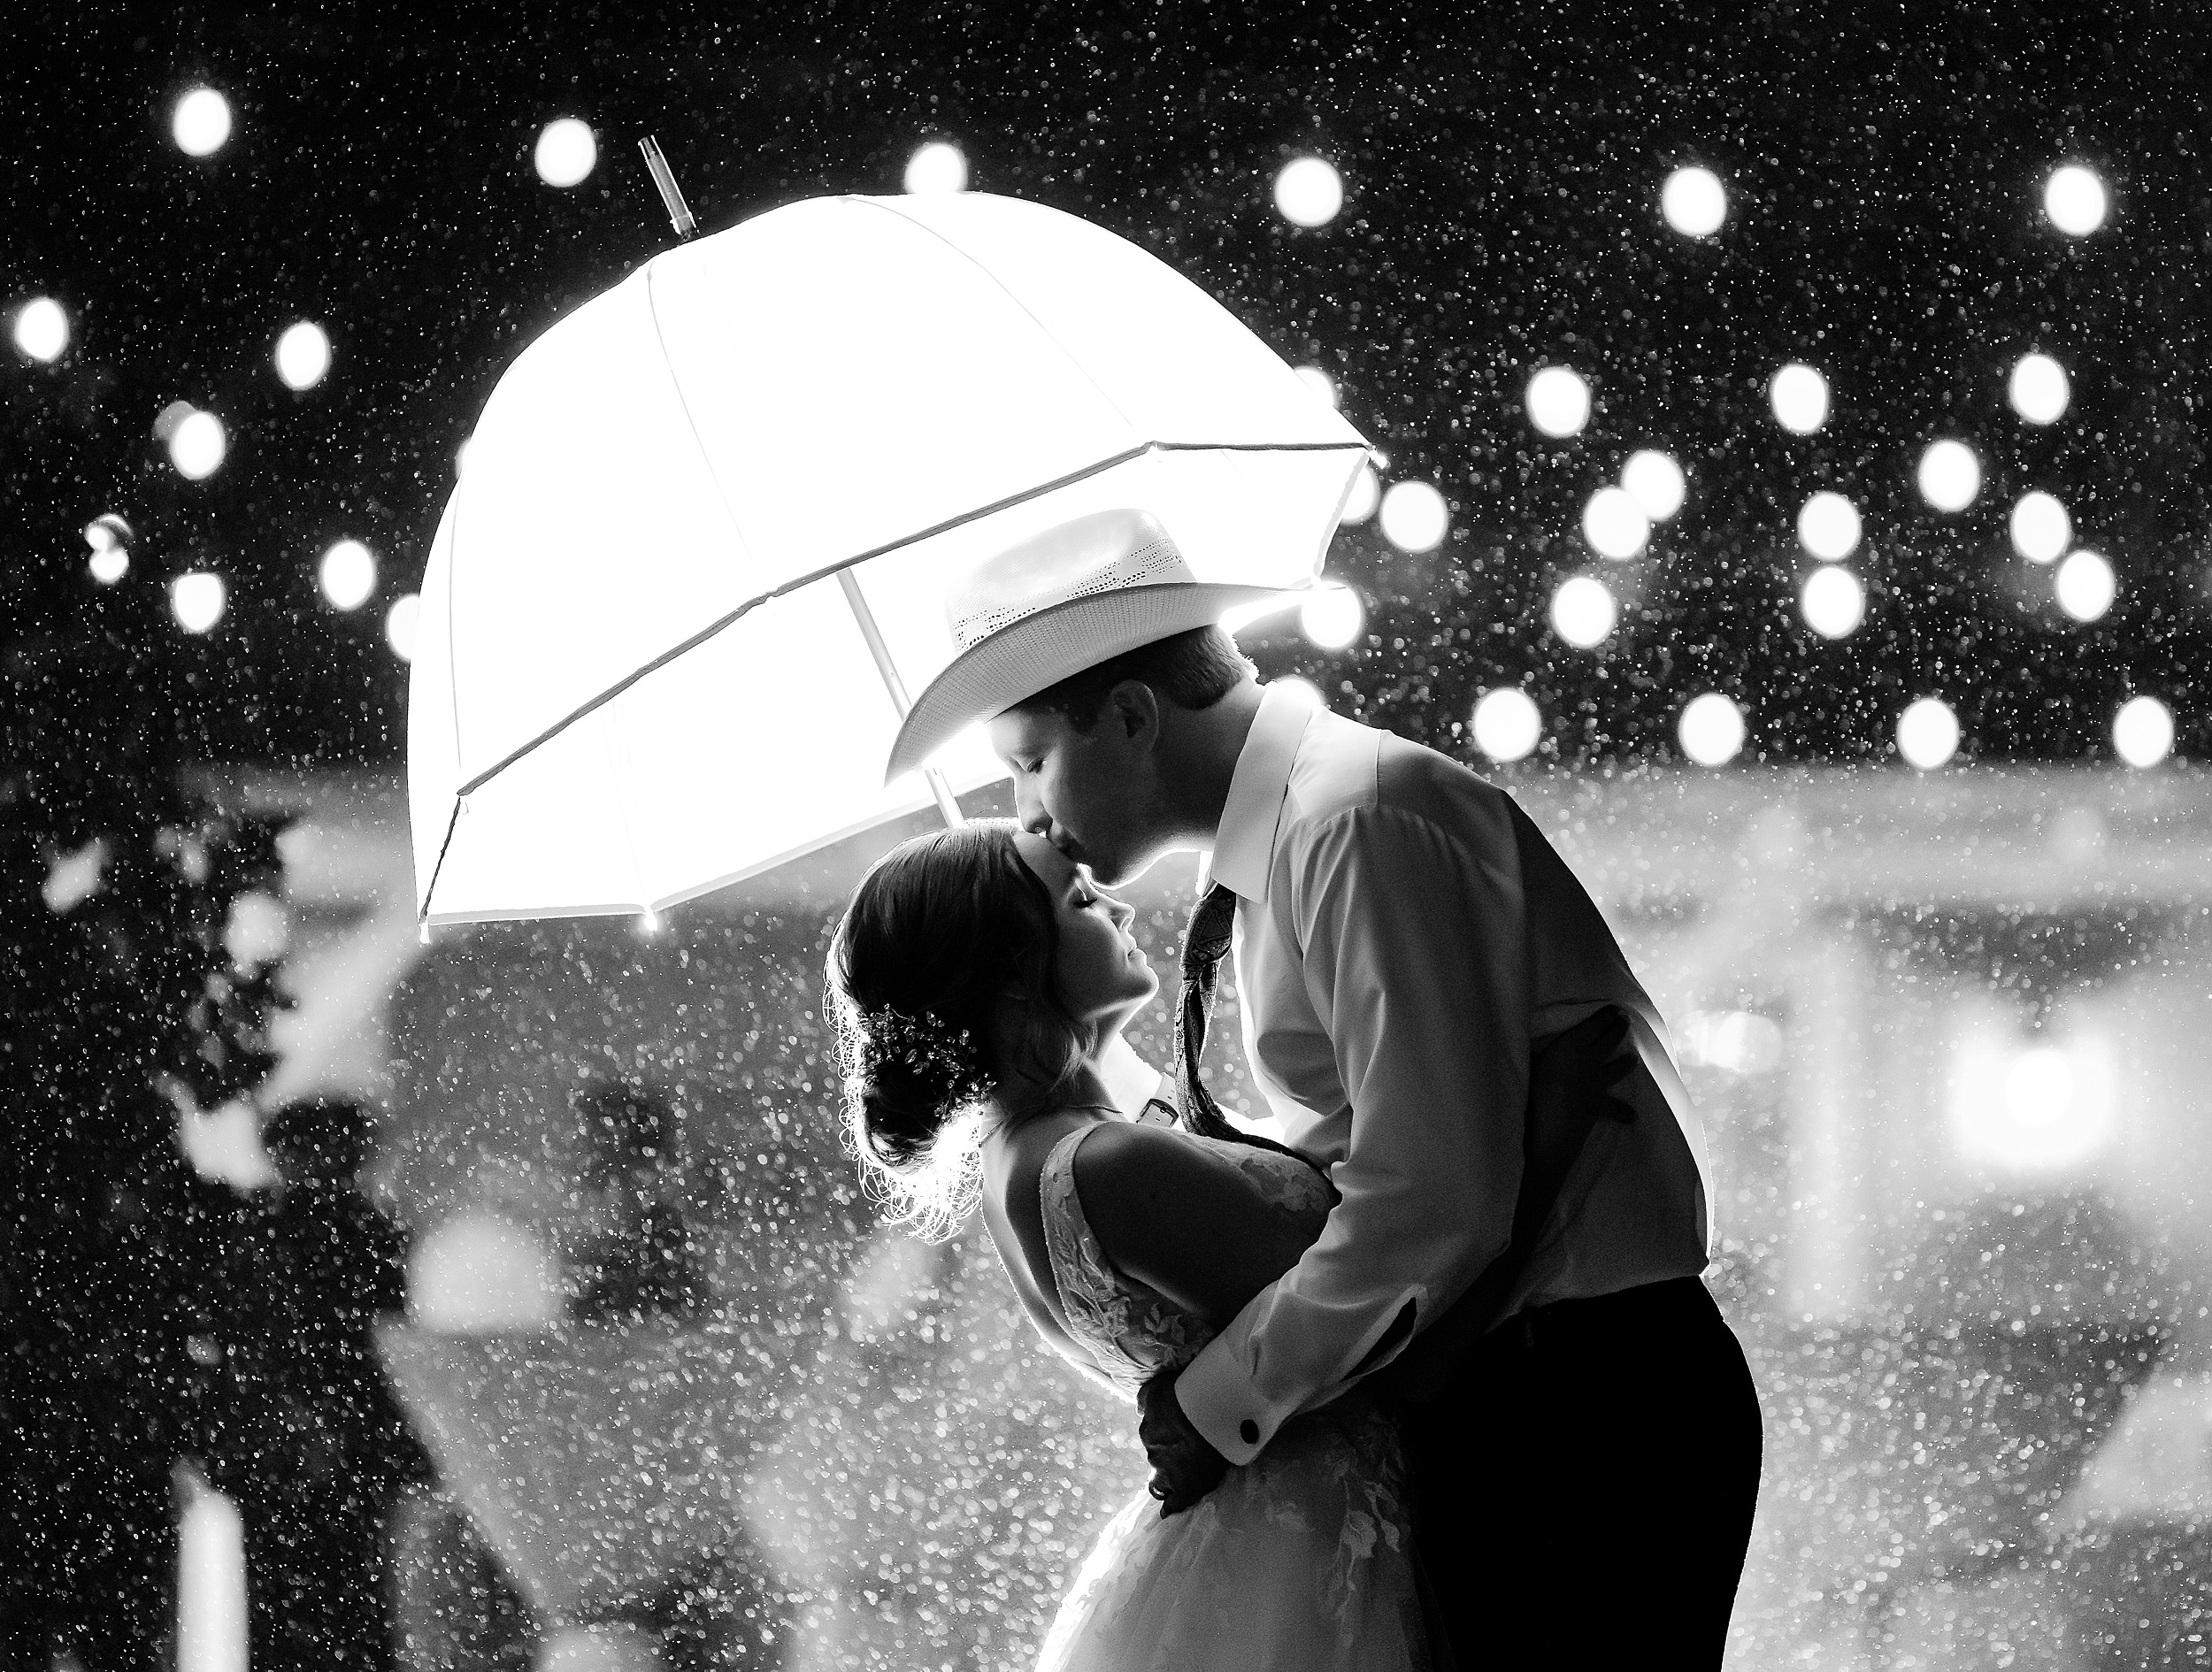 A groom kisses the forehead of his bride under an umbrella in the rain at their bowing oaks wedding